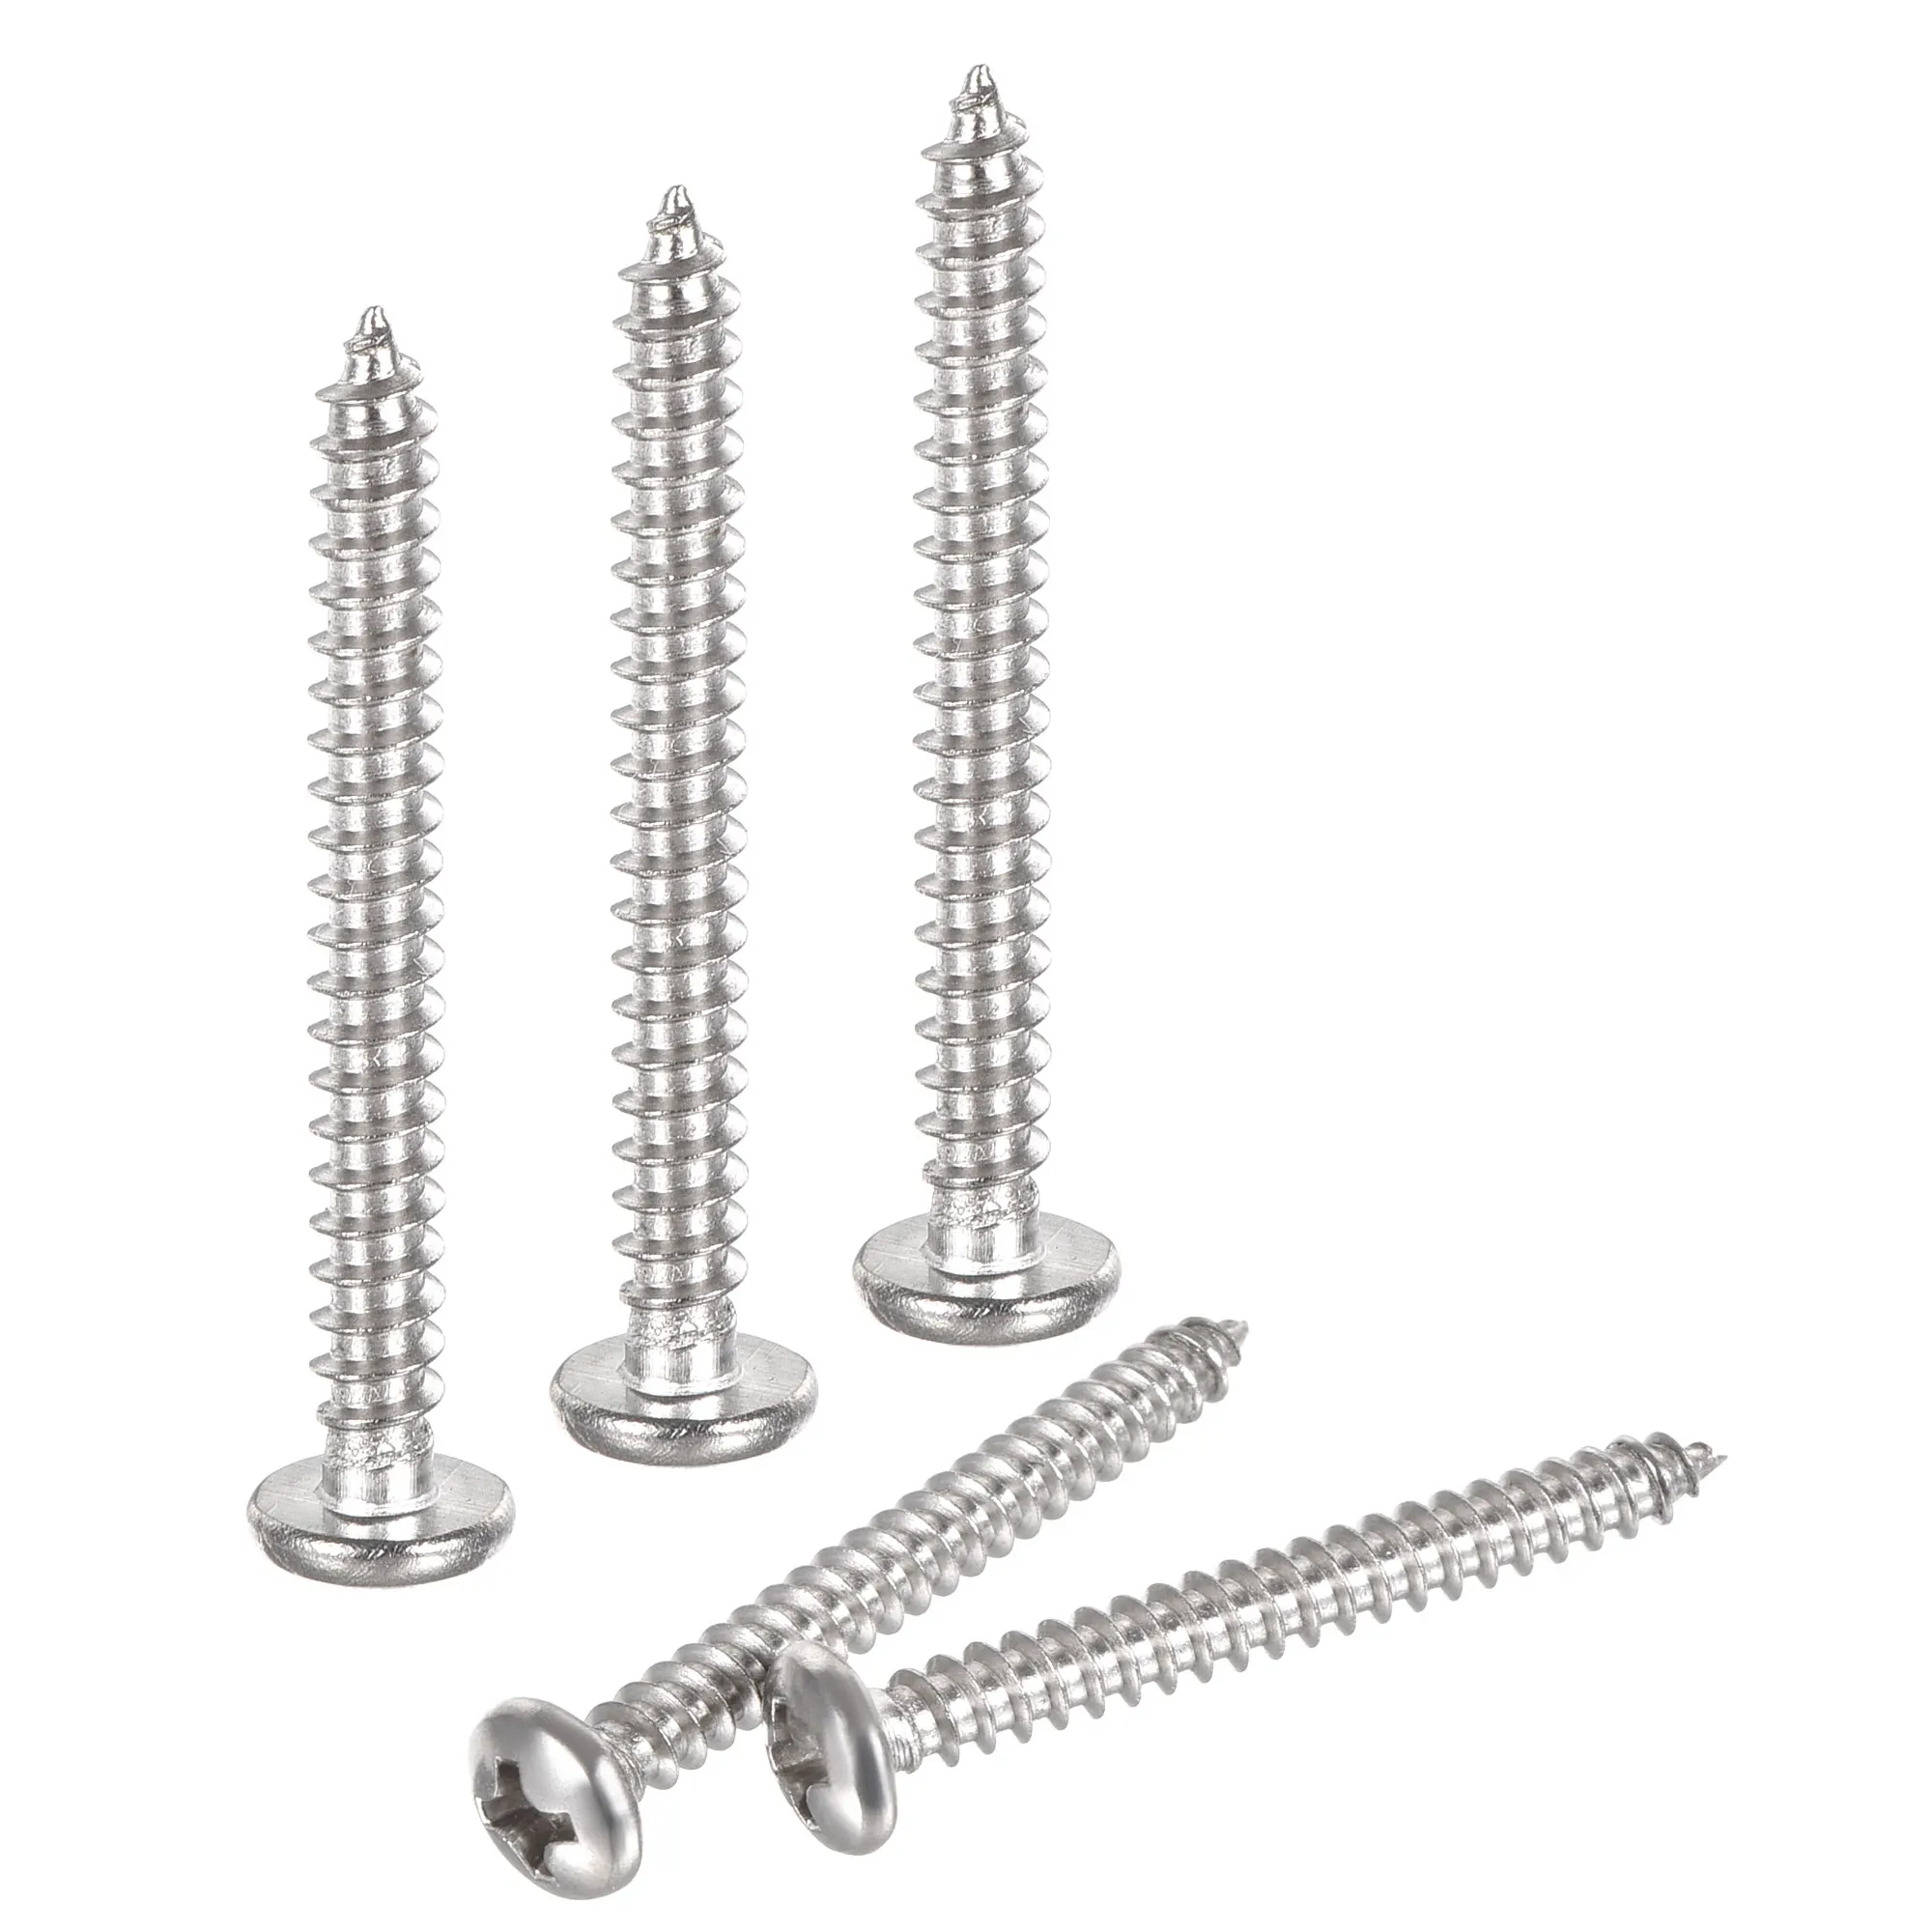 Uxcell Machine Screws #6x1-1/4 Phillips Screw 304 Stainless Steel Bolts 50 Pcs